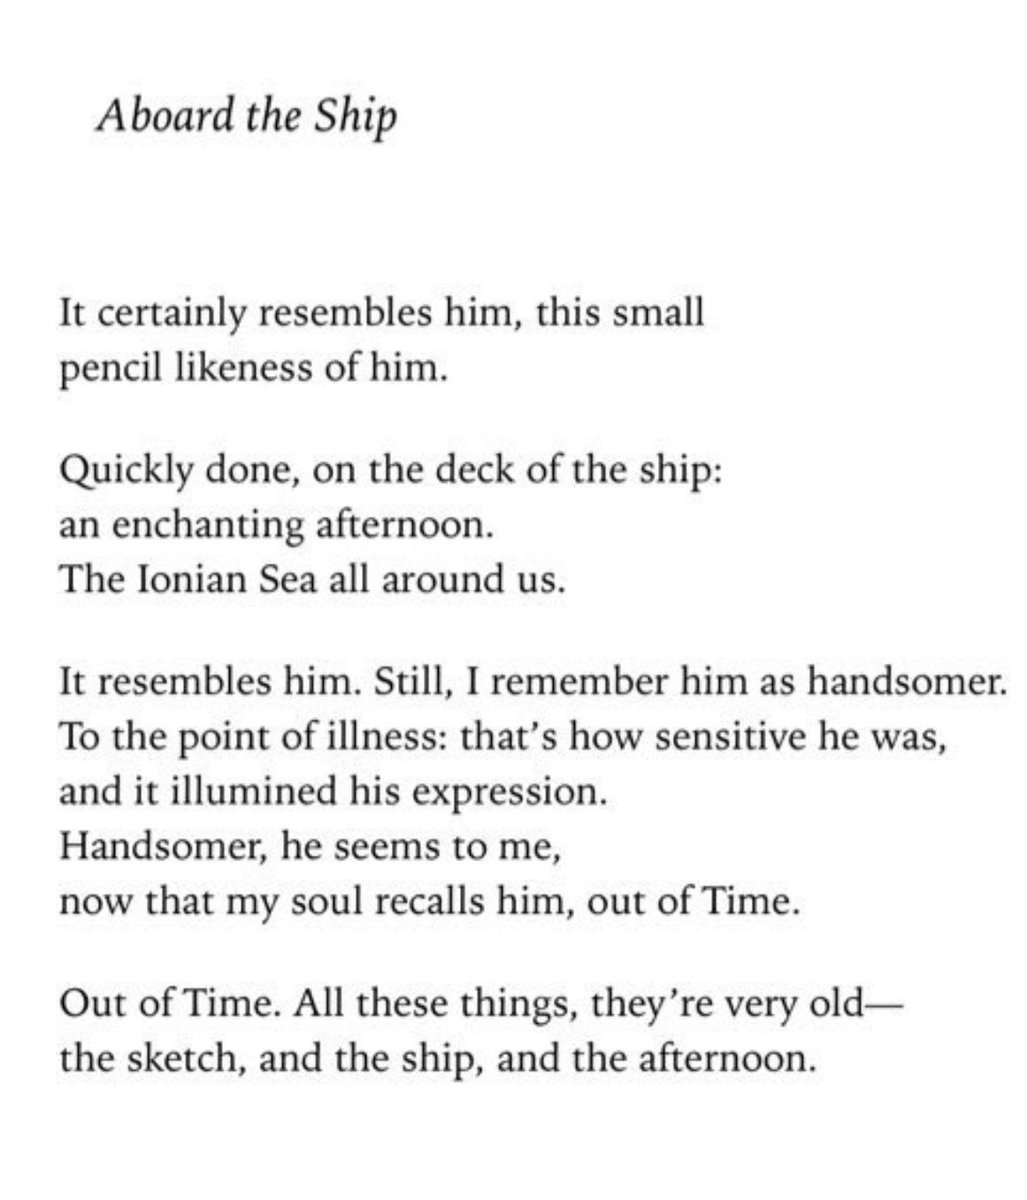 “Out of Time.” ~ C.P. Cavafy “Aboard the Ship” translated by @DAMendelsohnNYC